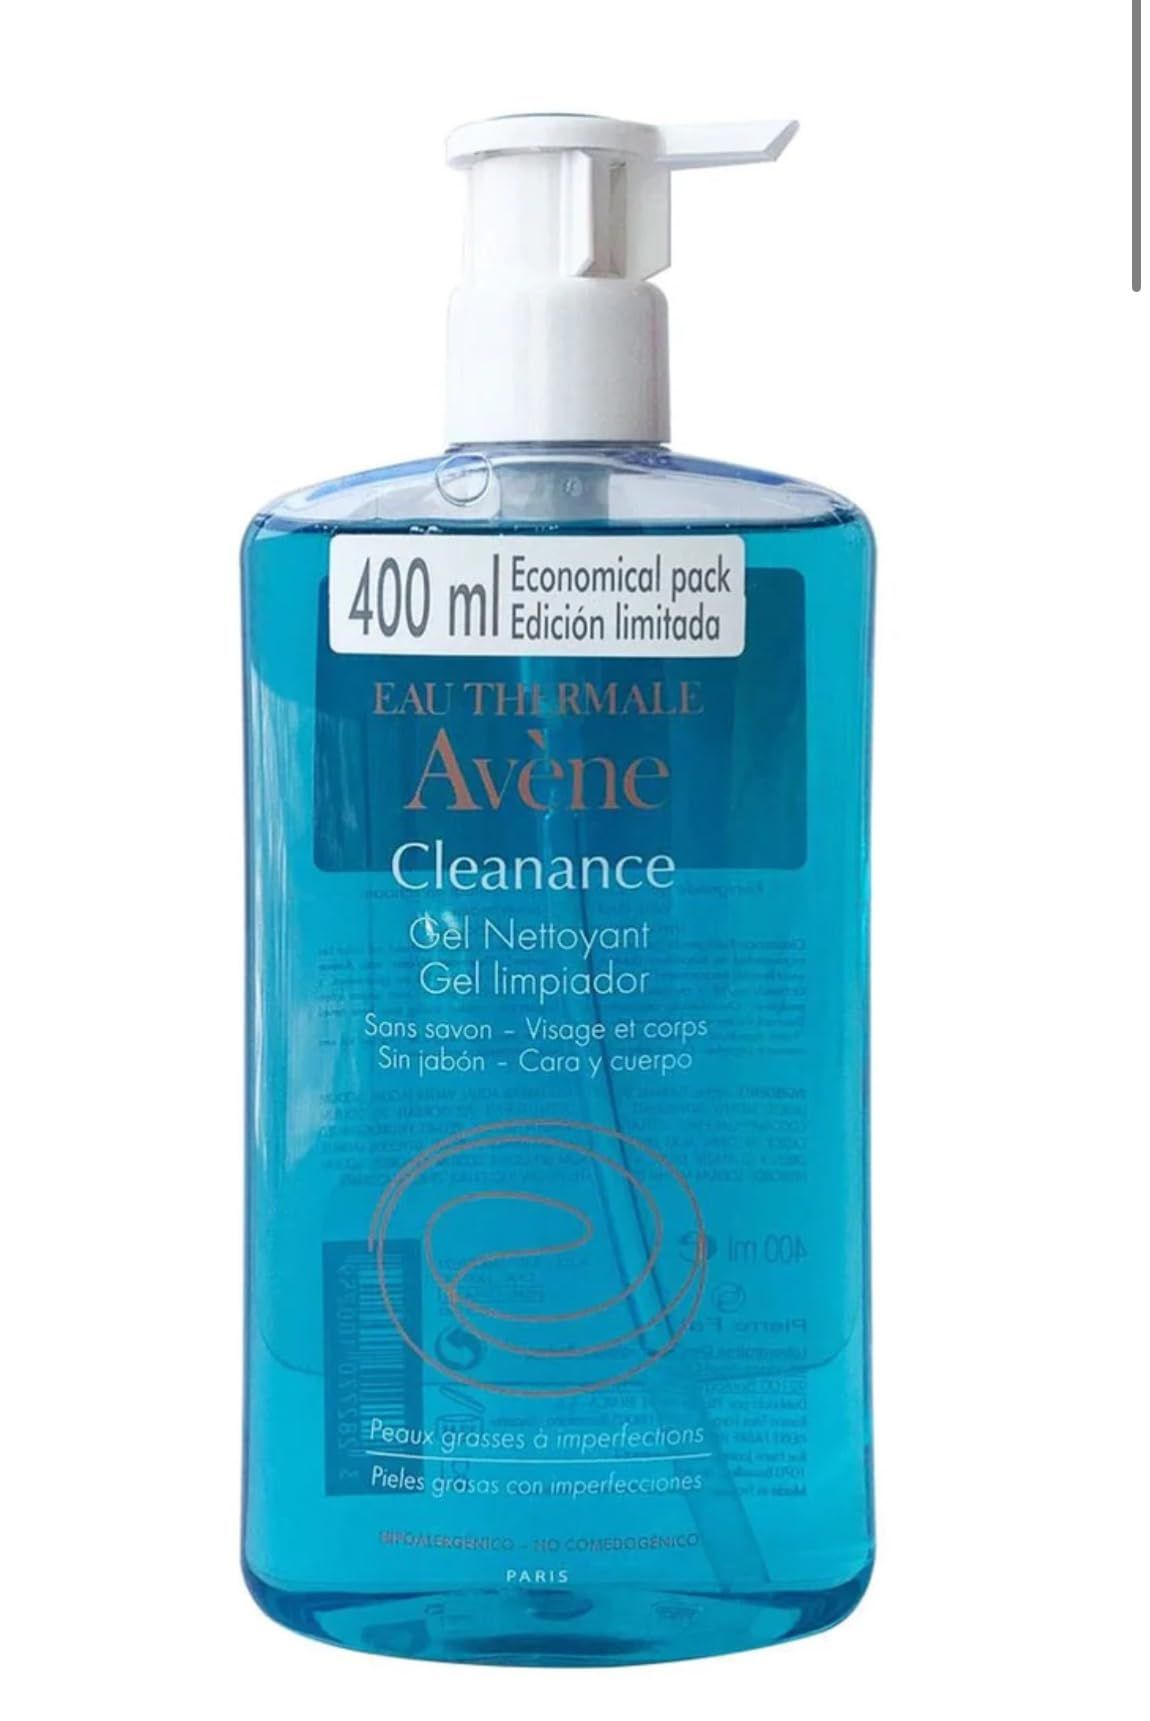 Eau Thermale Avene Cleanance Cleansing Gel Soap Free Cleanser for Acne Prone, Oily, Face & Body, ... | Amazon (US)